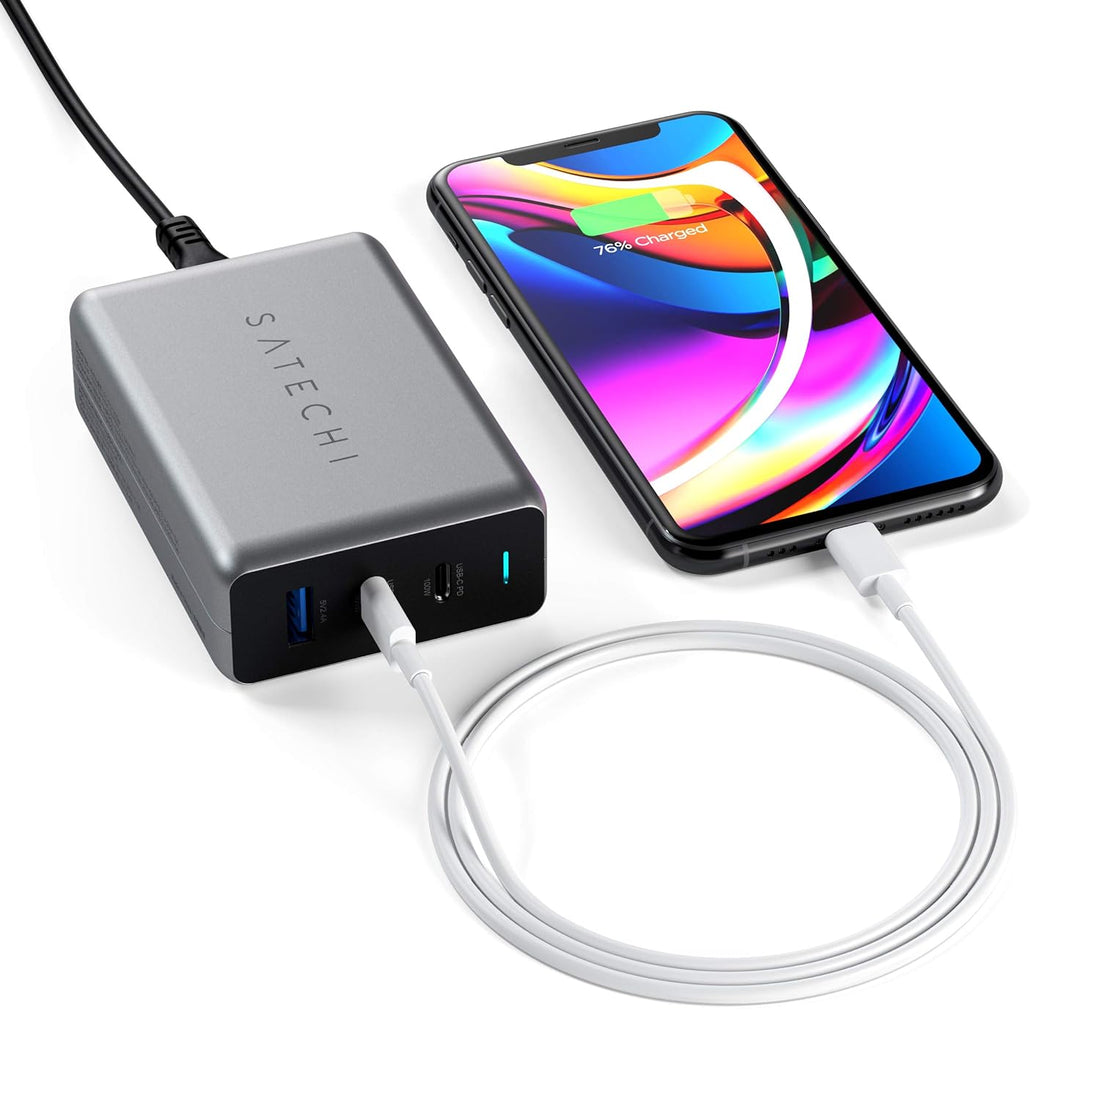 Satechi 100W USB-C PD Compact GaN Charger – Powerful GaN Tech – Compatible with 2020 MacBook Pro 16-inch, 2020 MacBook Air M1, 2020 iPad Pro, 2020 iPad Air, iPhone 12 Pro Max/12 Pro/12 Mini/12